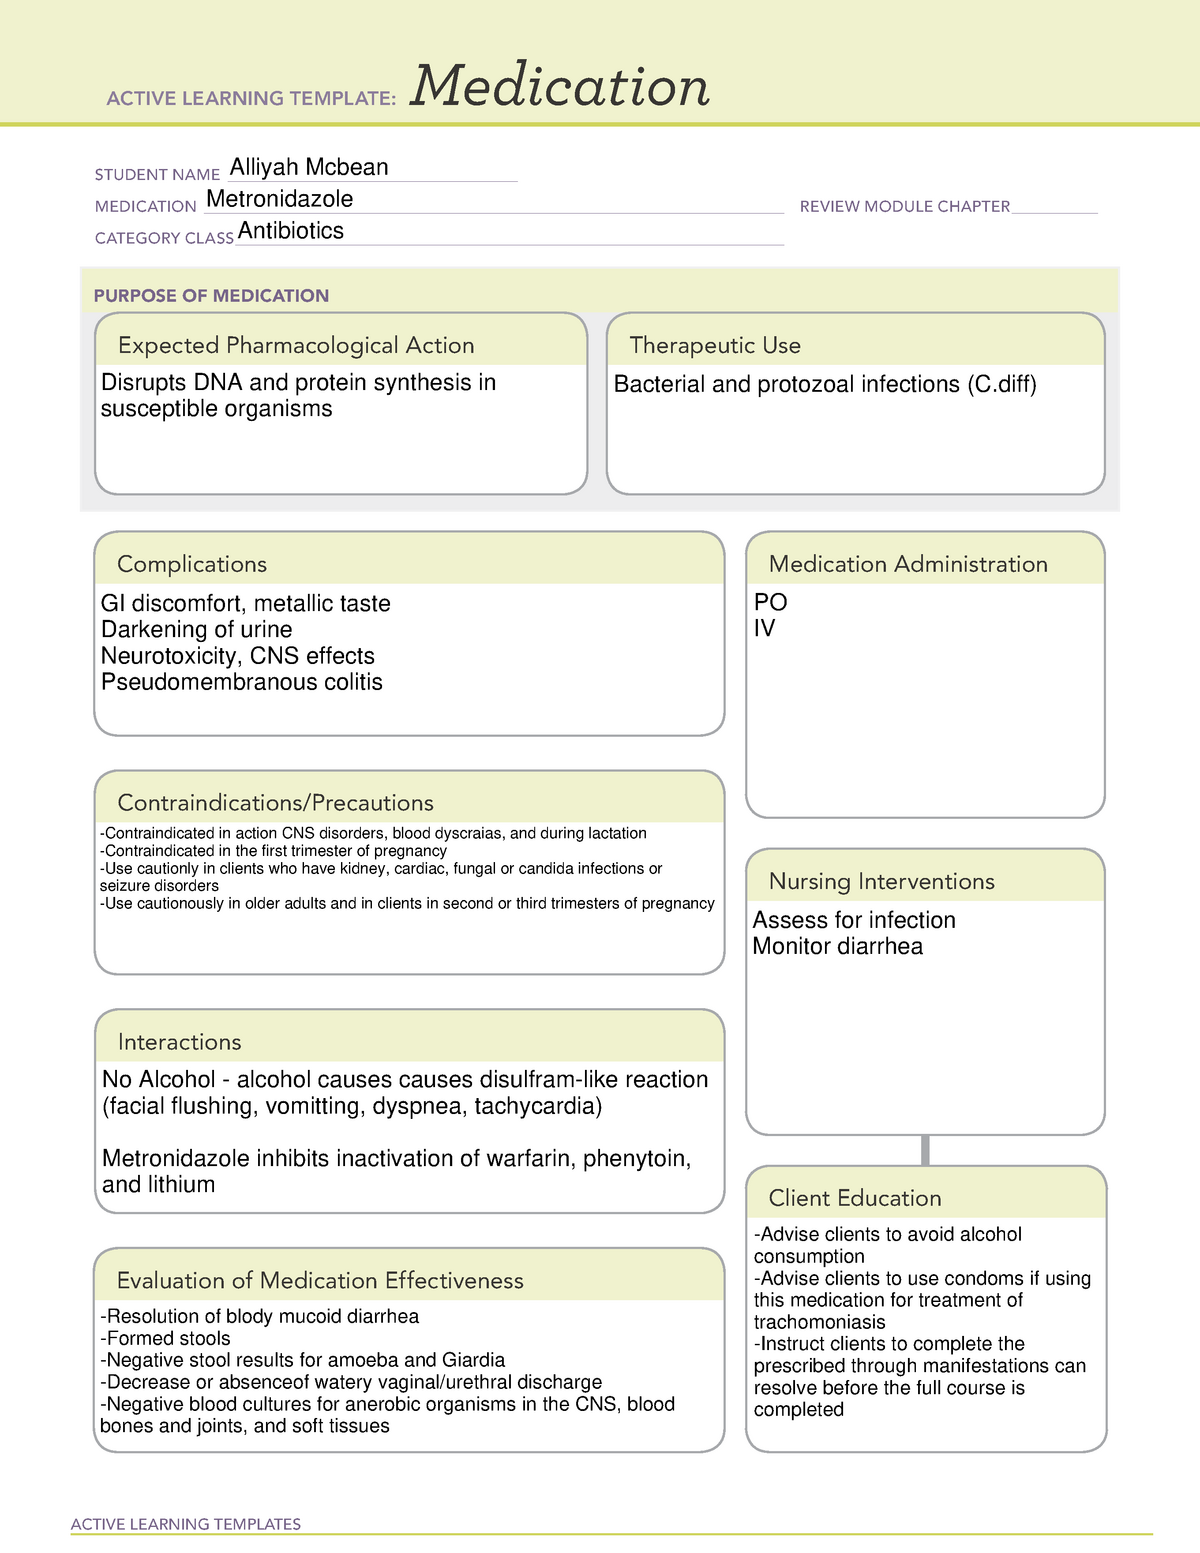 Active Learning Template Medication